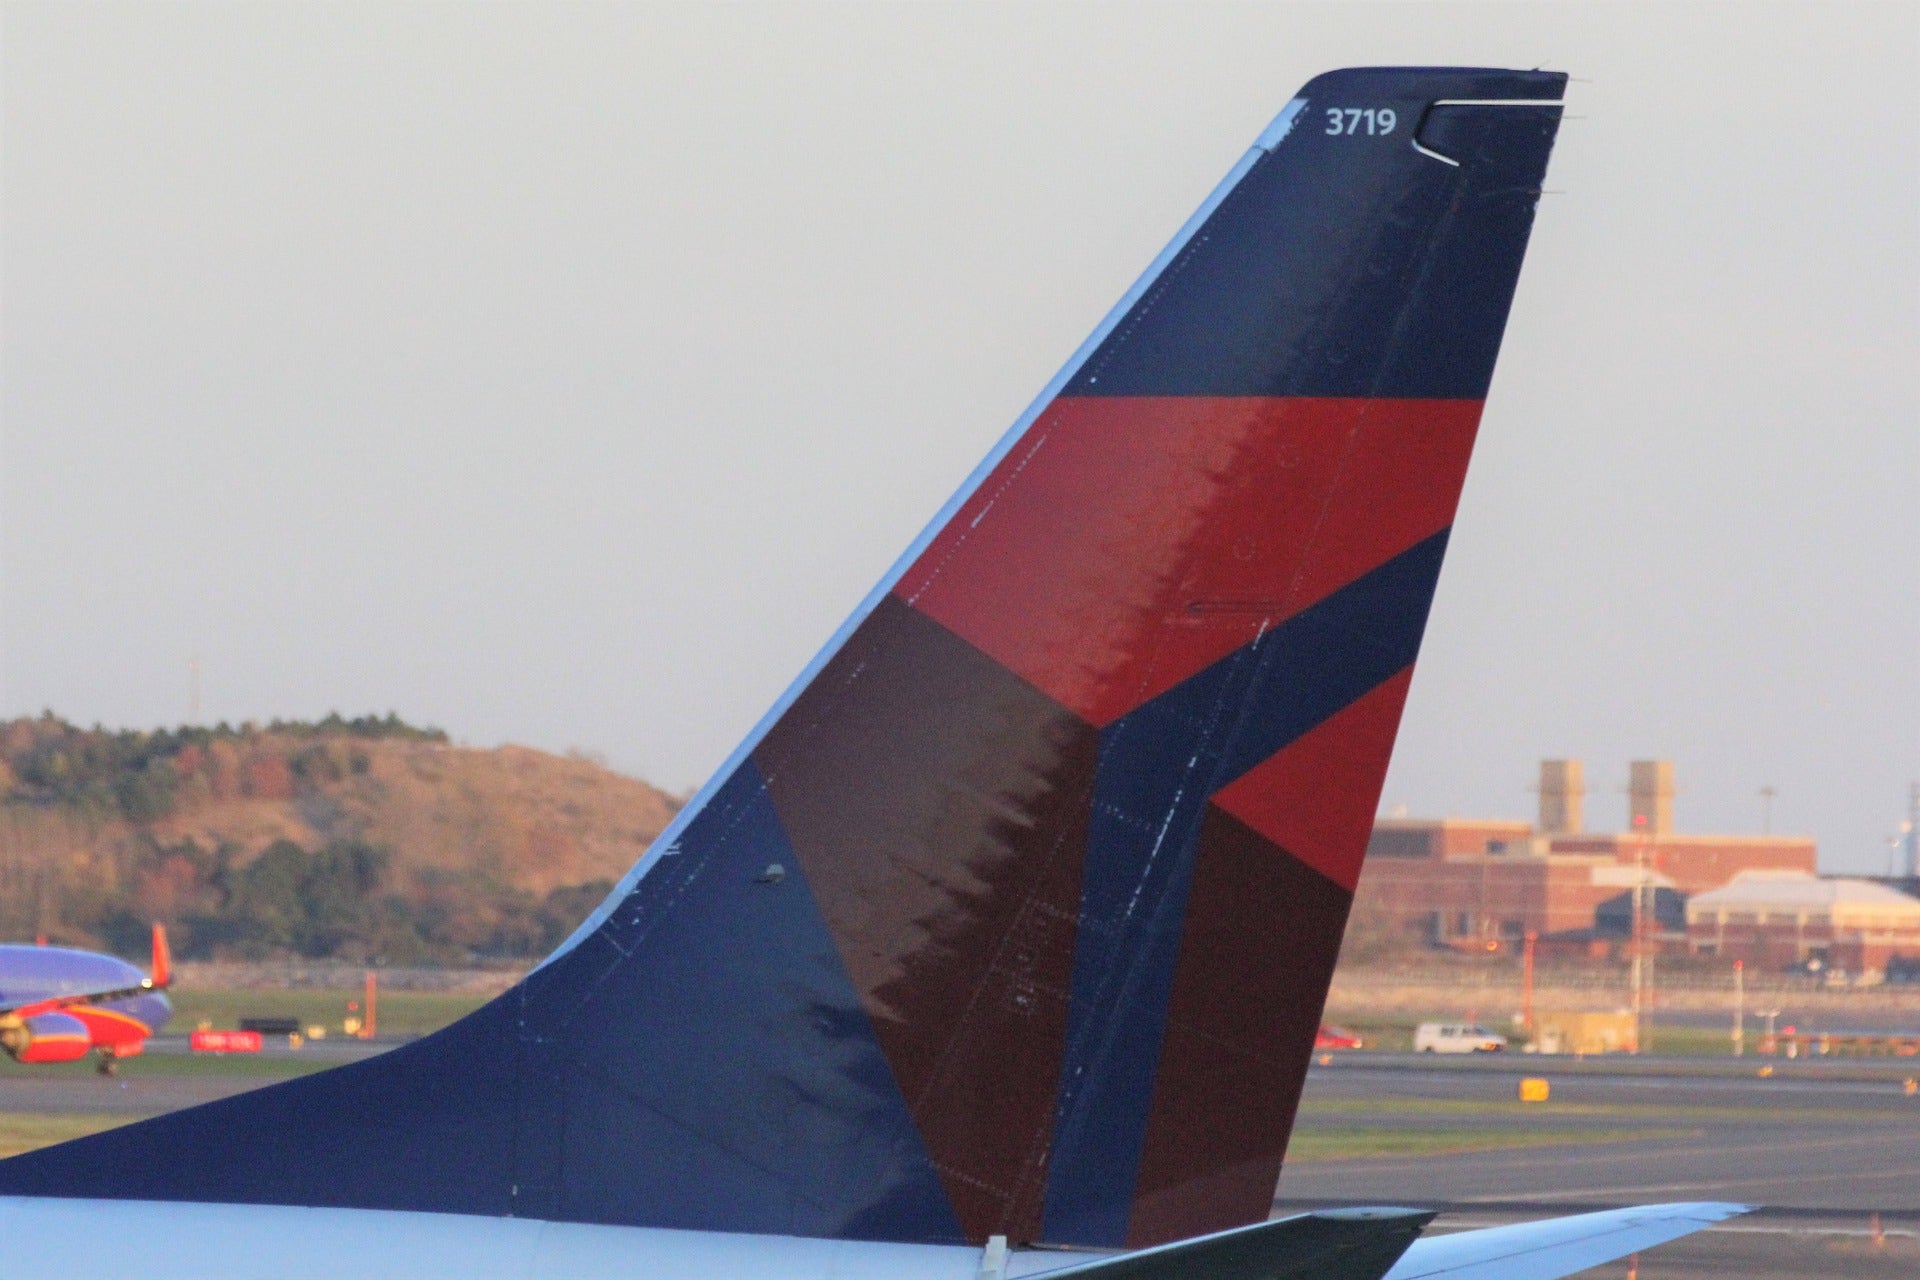 Delta Airlines Stock Takes A Dip Lower: What's Next?